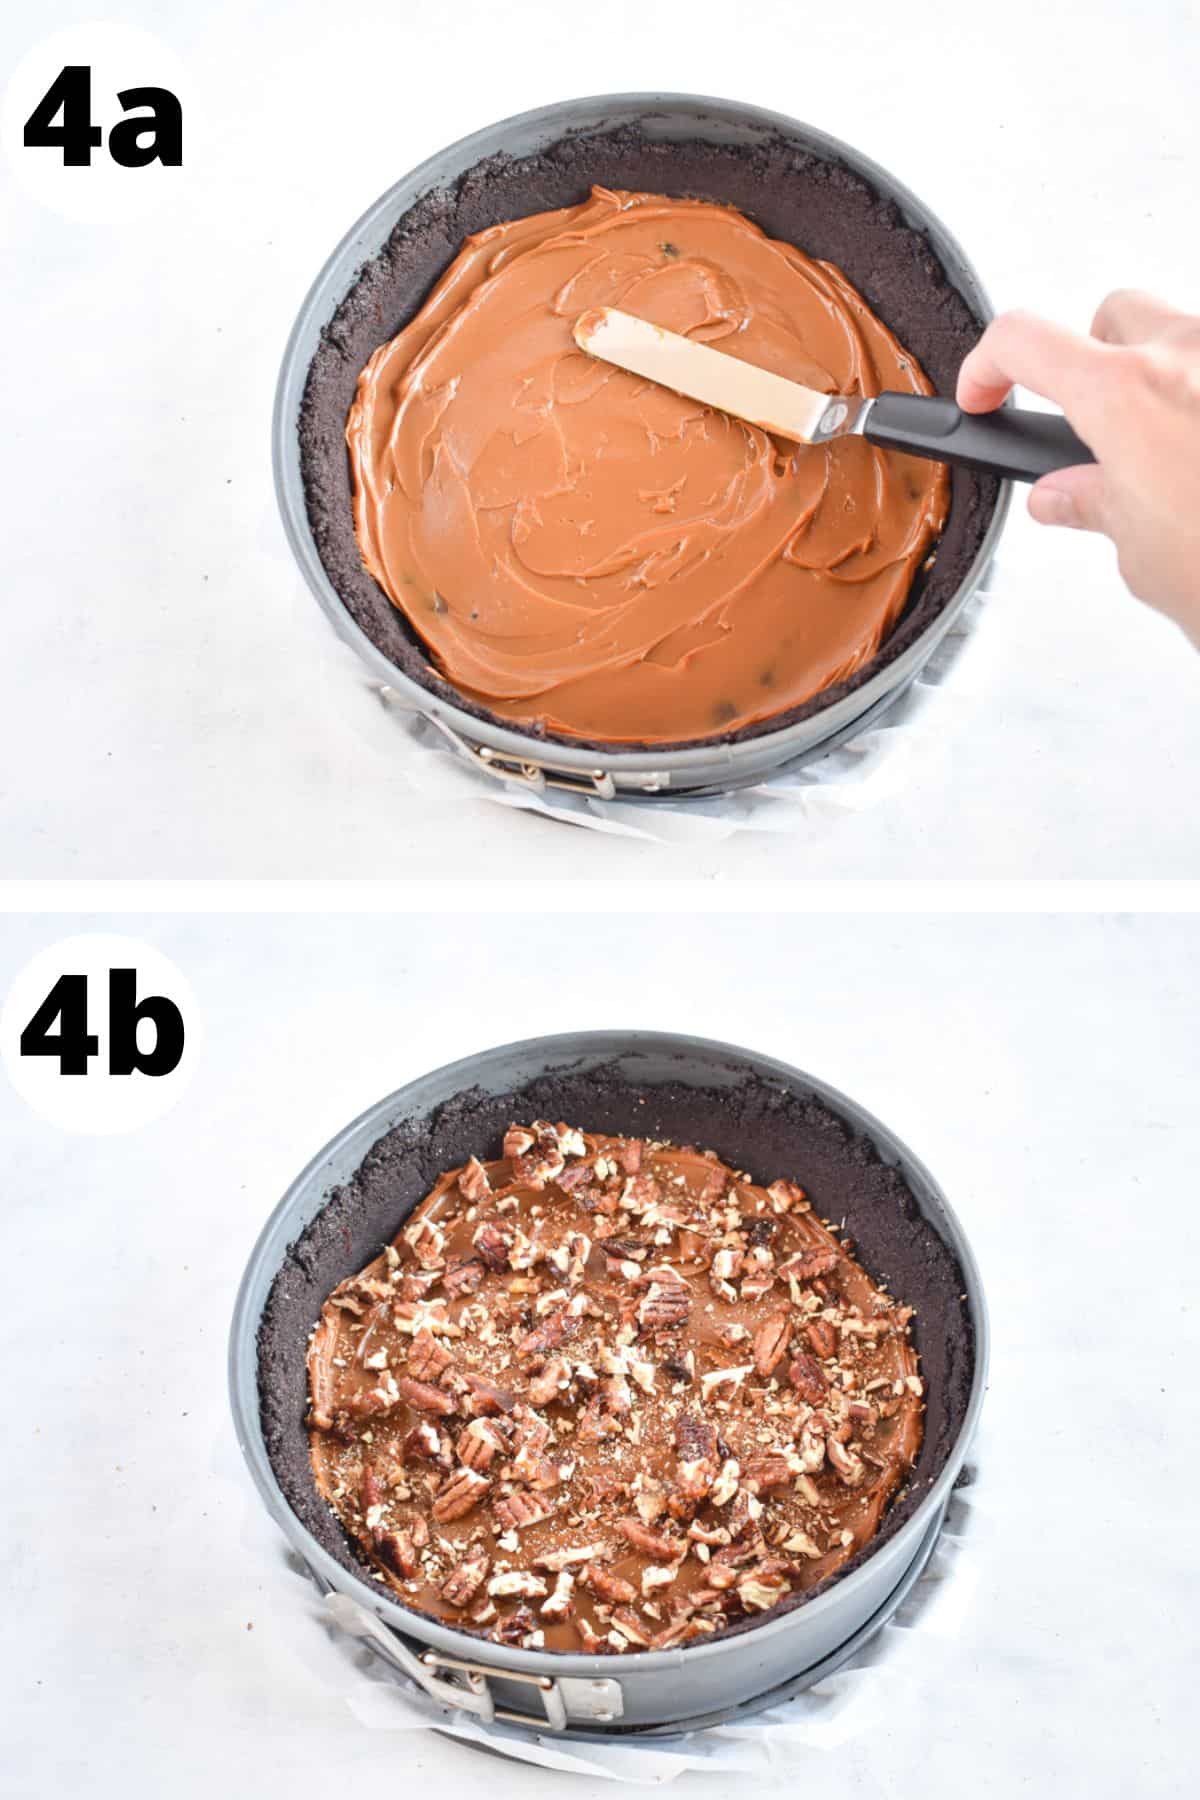 one image showing spreading caramel in the bottom of the pie and another image showing pecans sprinkled on top. 